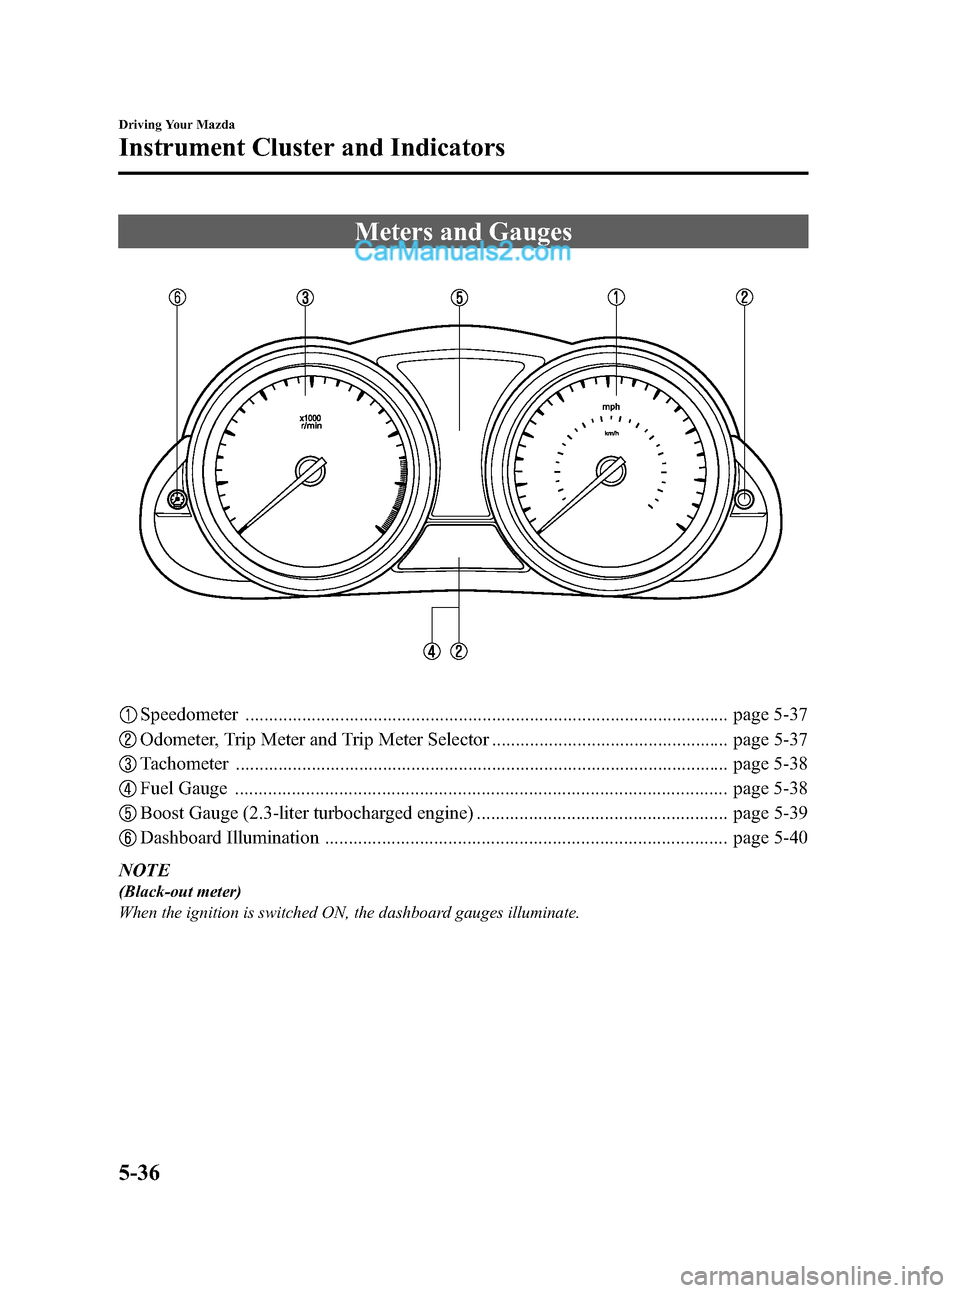 MAZDA MODEL MAZDASPEED 3 2012  Owners Manual (in English) Black plate (196,1)
Meters and Gauges
Speedometer ...................................................................................................... page 5-37
Odometer, Trip Meter and Trip Meter S